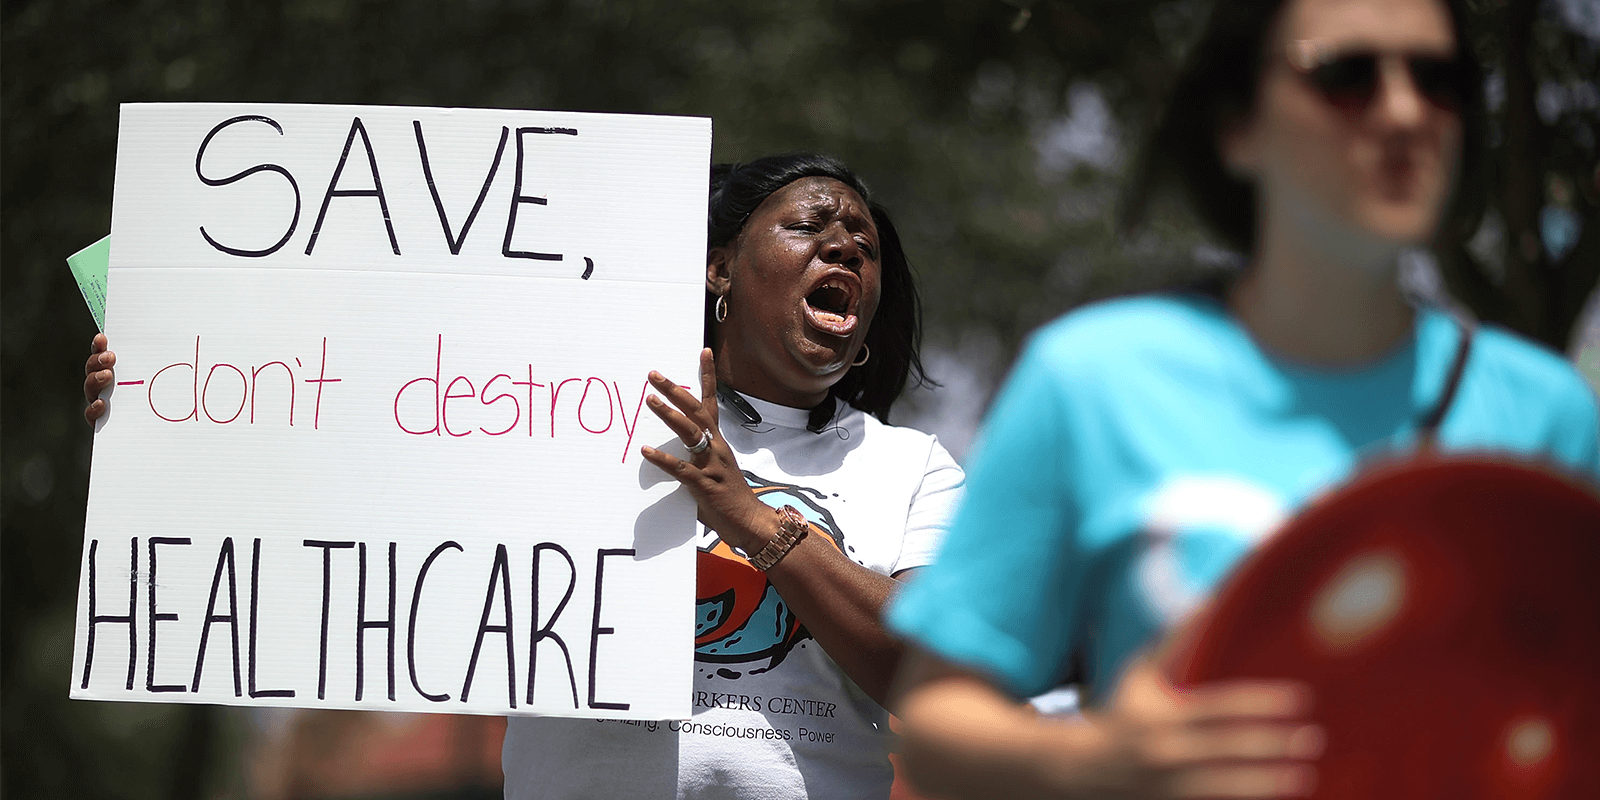 Yes. Seriously. Trump wants to kill the Affordable Care Act – in the midst of a pandemic